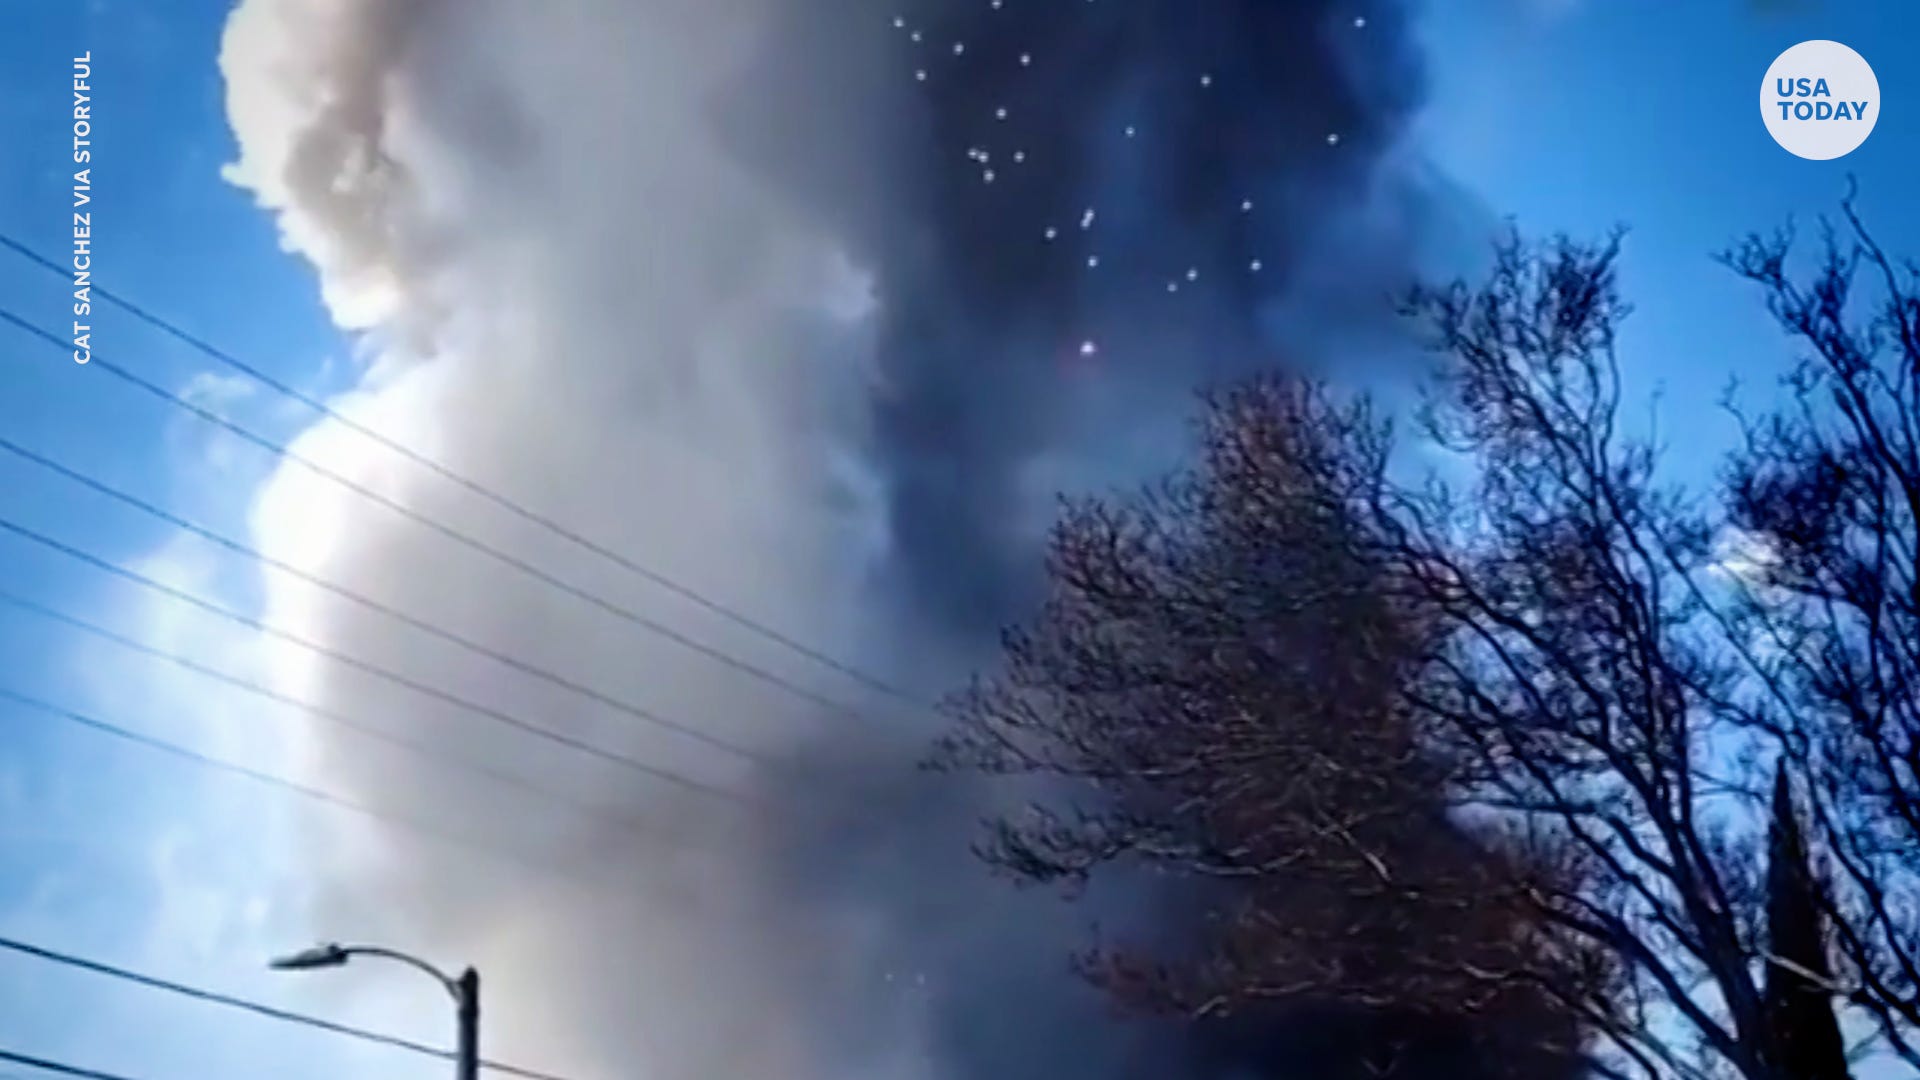 Home explosion from 'large amount of fireworks' leaves at least 2 dead, streets evacuated